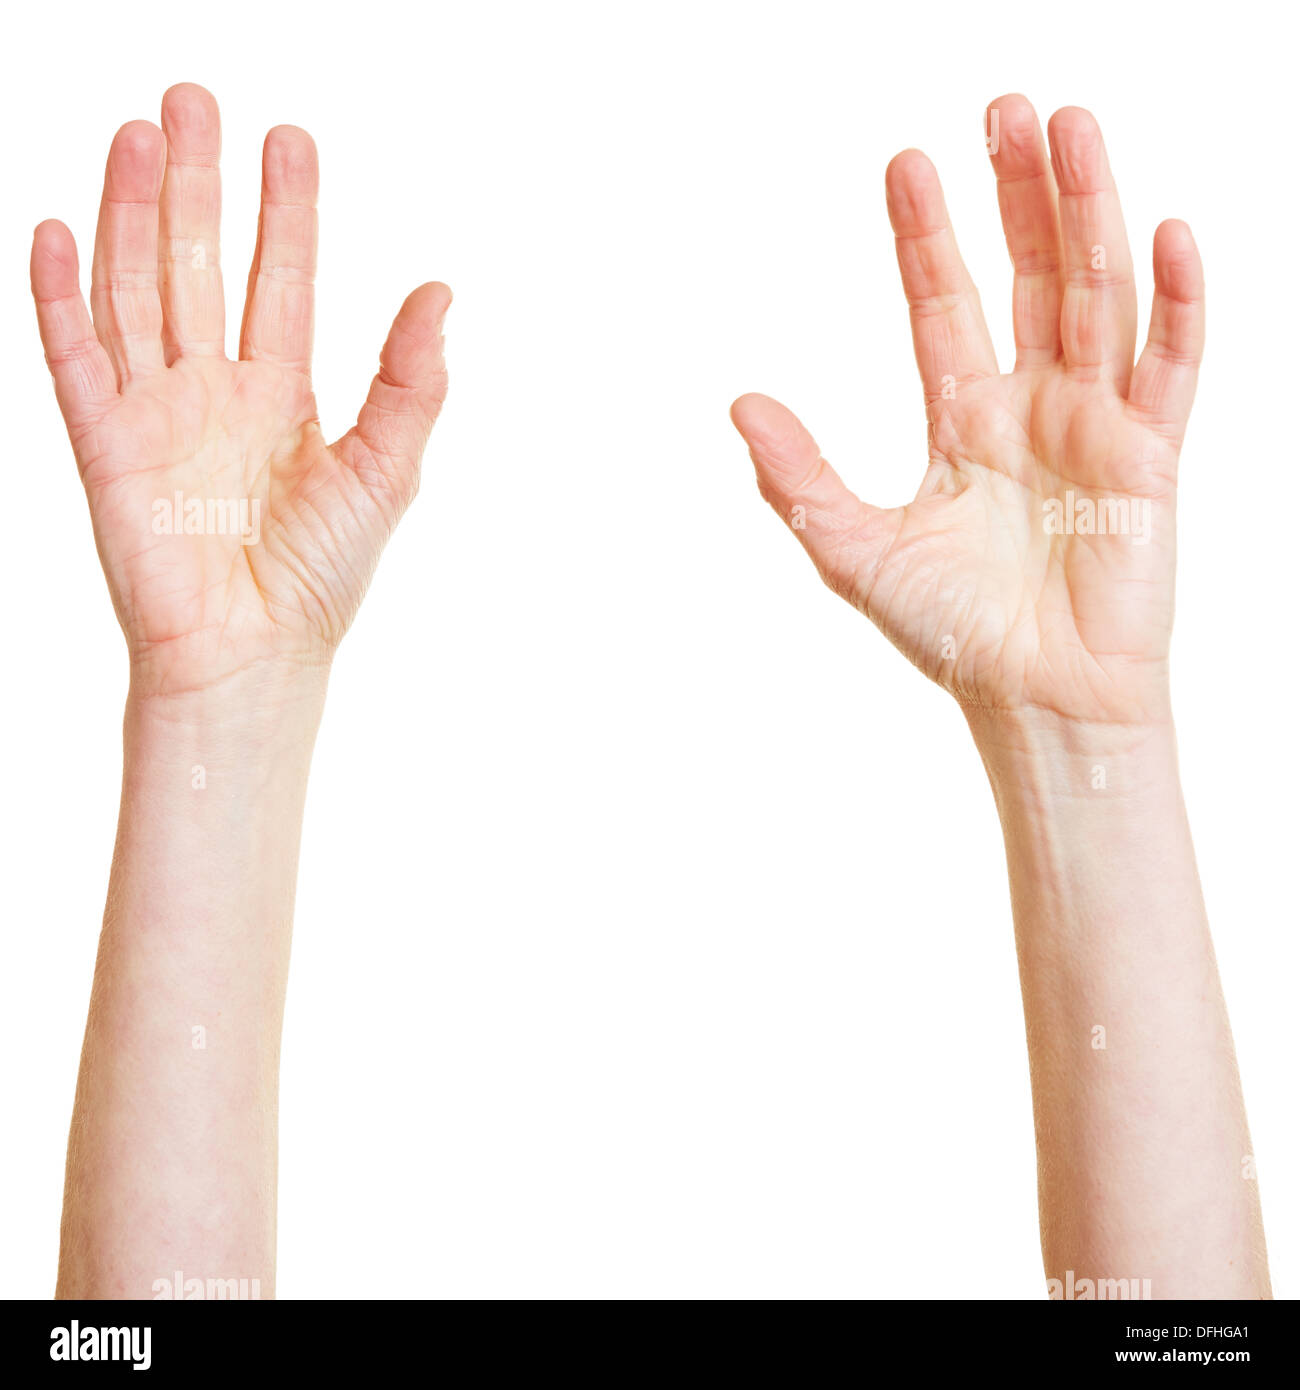 Two hands desperately reaching up into the air Stock Photo